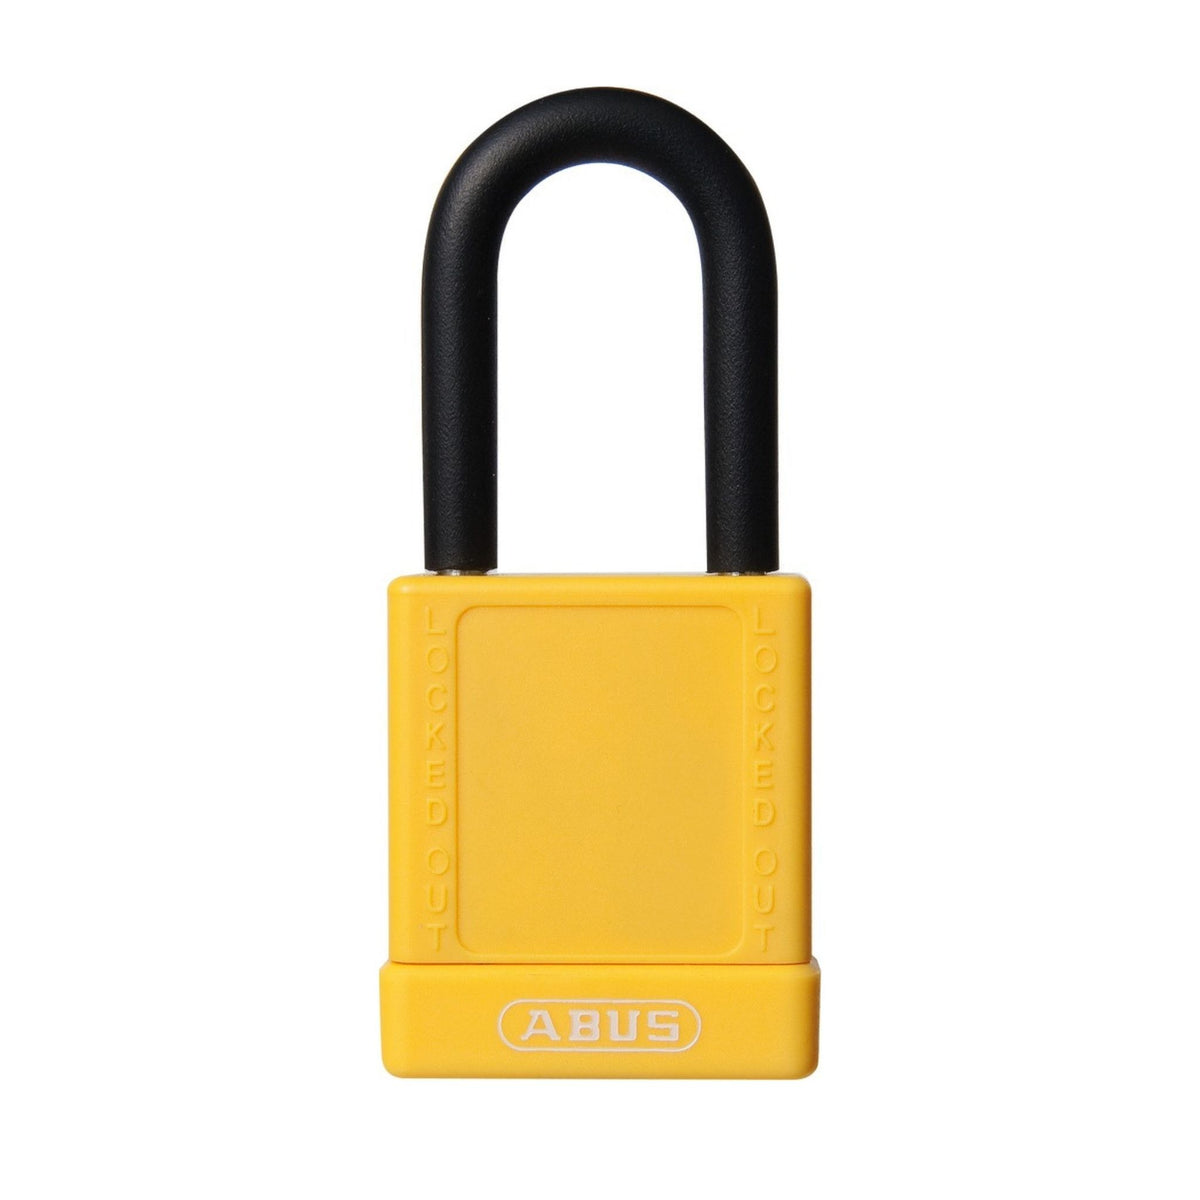 Abus 74/40 MK Master Keyed Yellow Insulated Safety Padlock - The Lock Source